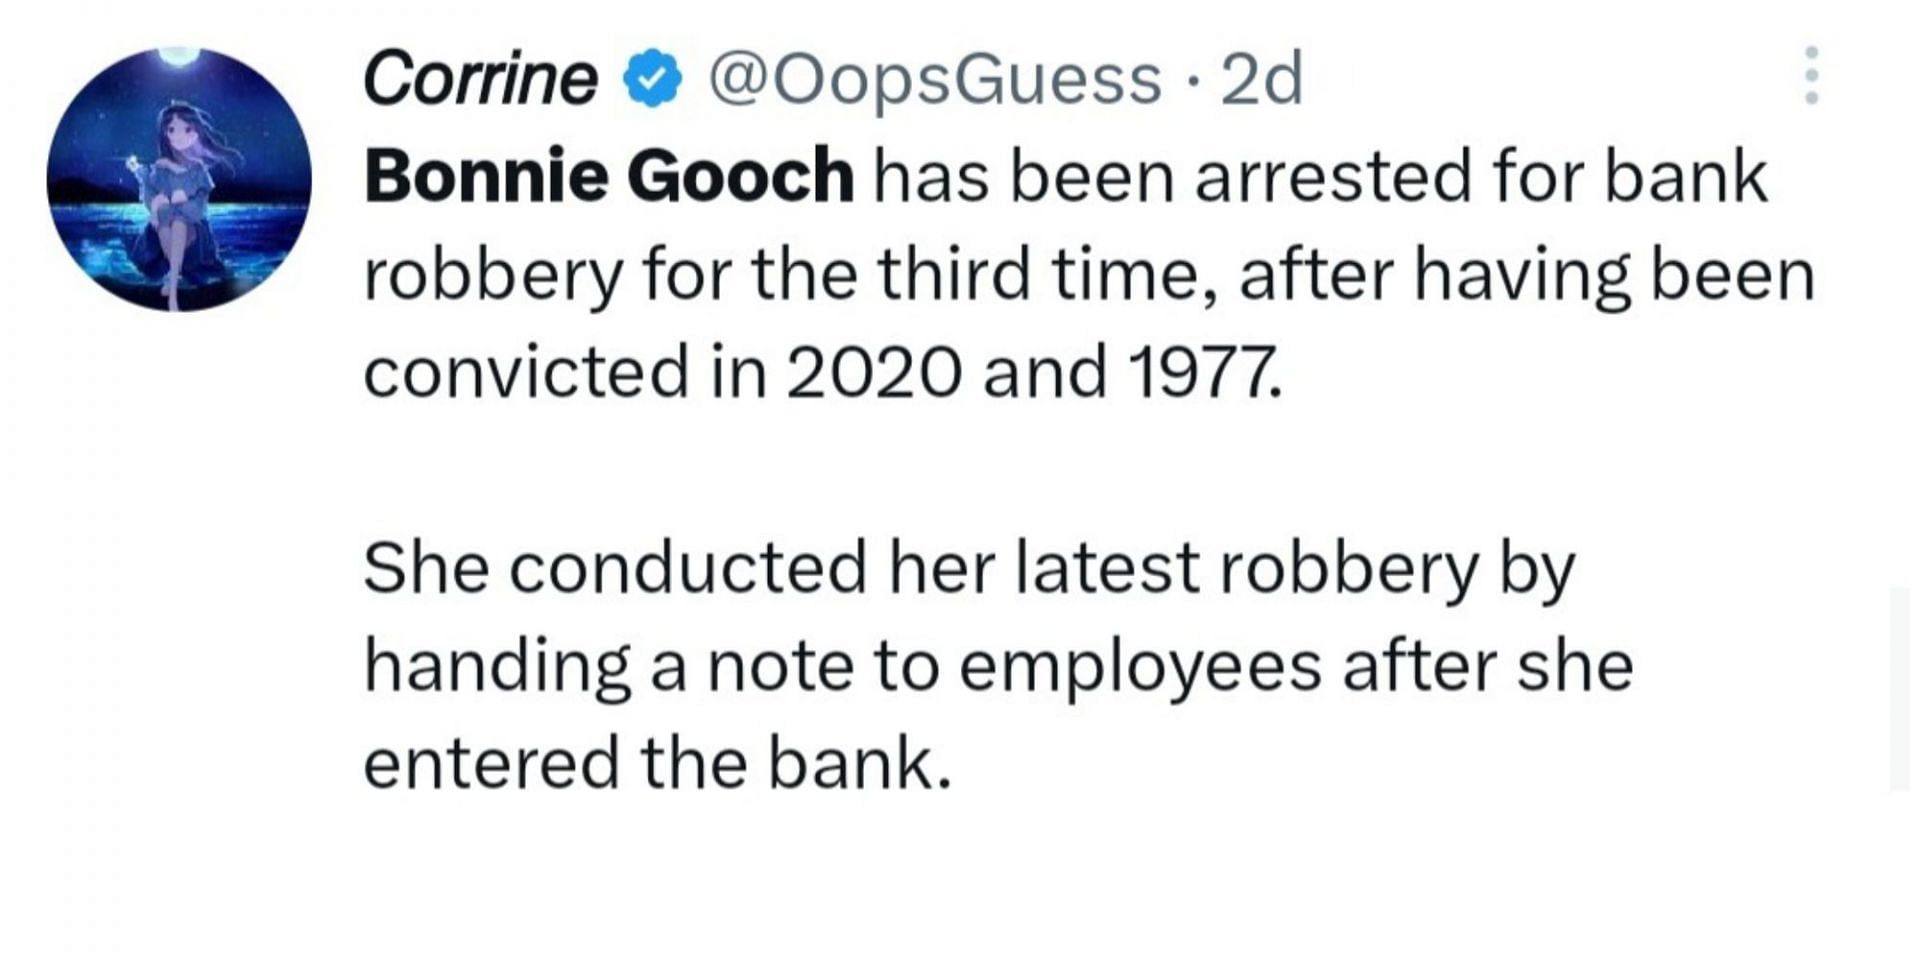 Bonnie Gooch arrested for bank robbery (Image via Twitter)